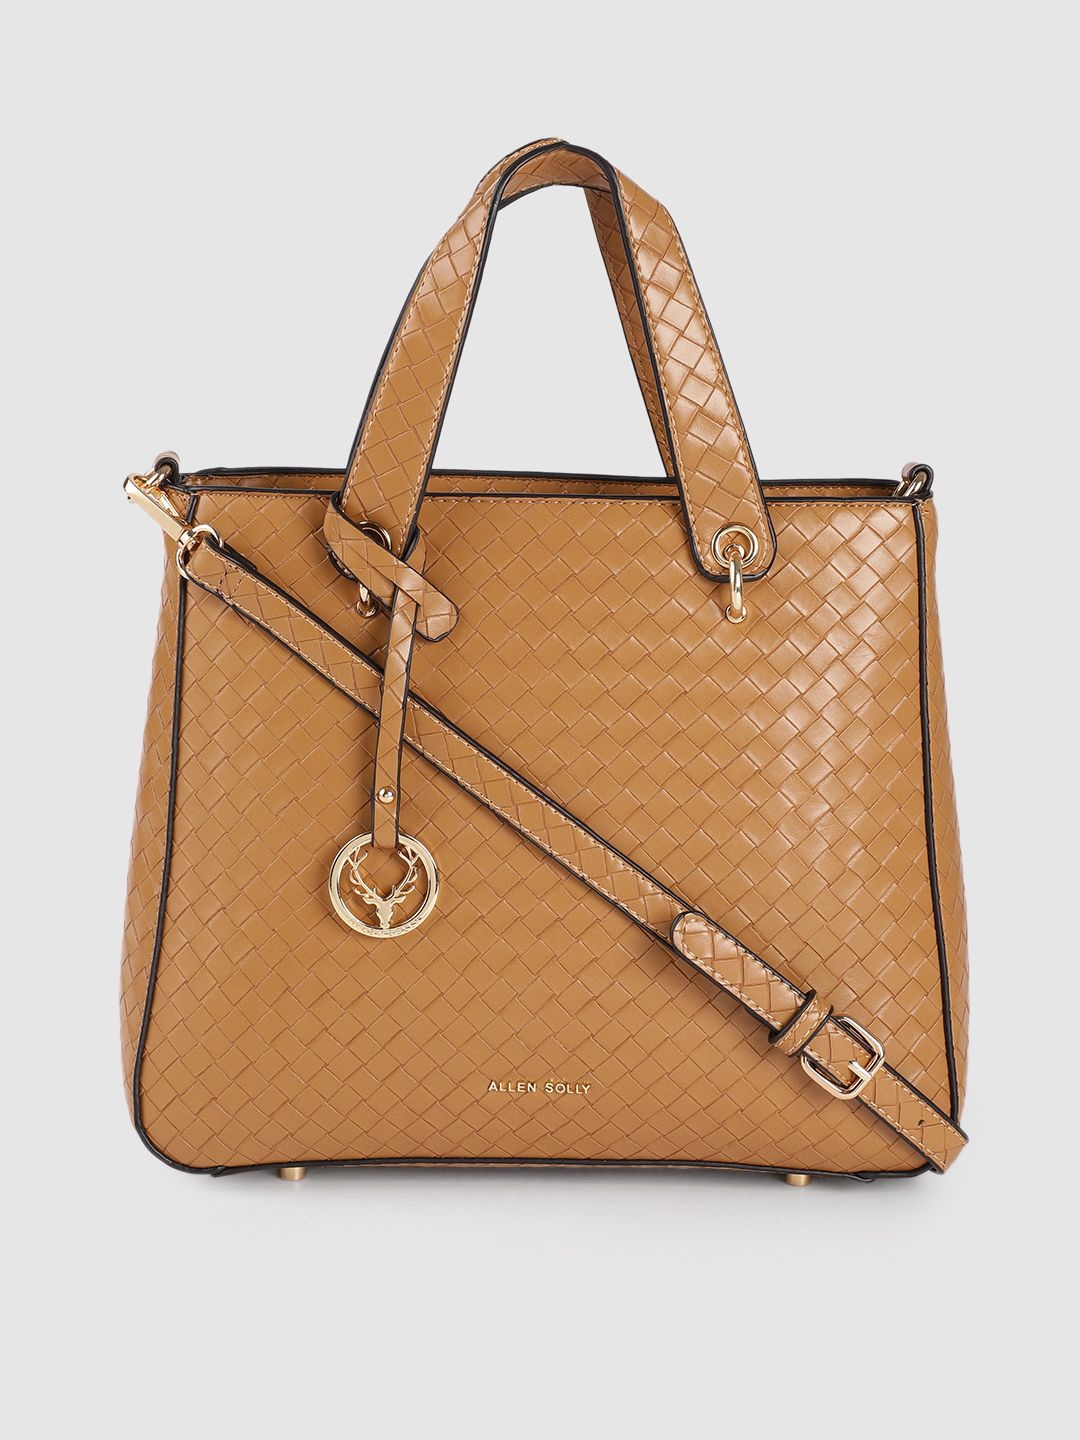 Allen Solly Tan Brown Textured PU Regular Structured Handheld Bag with Tasselled Detail Price in India